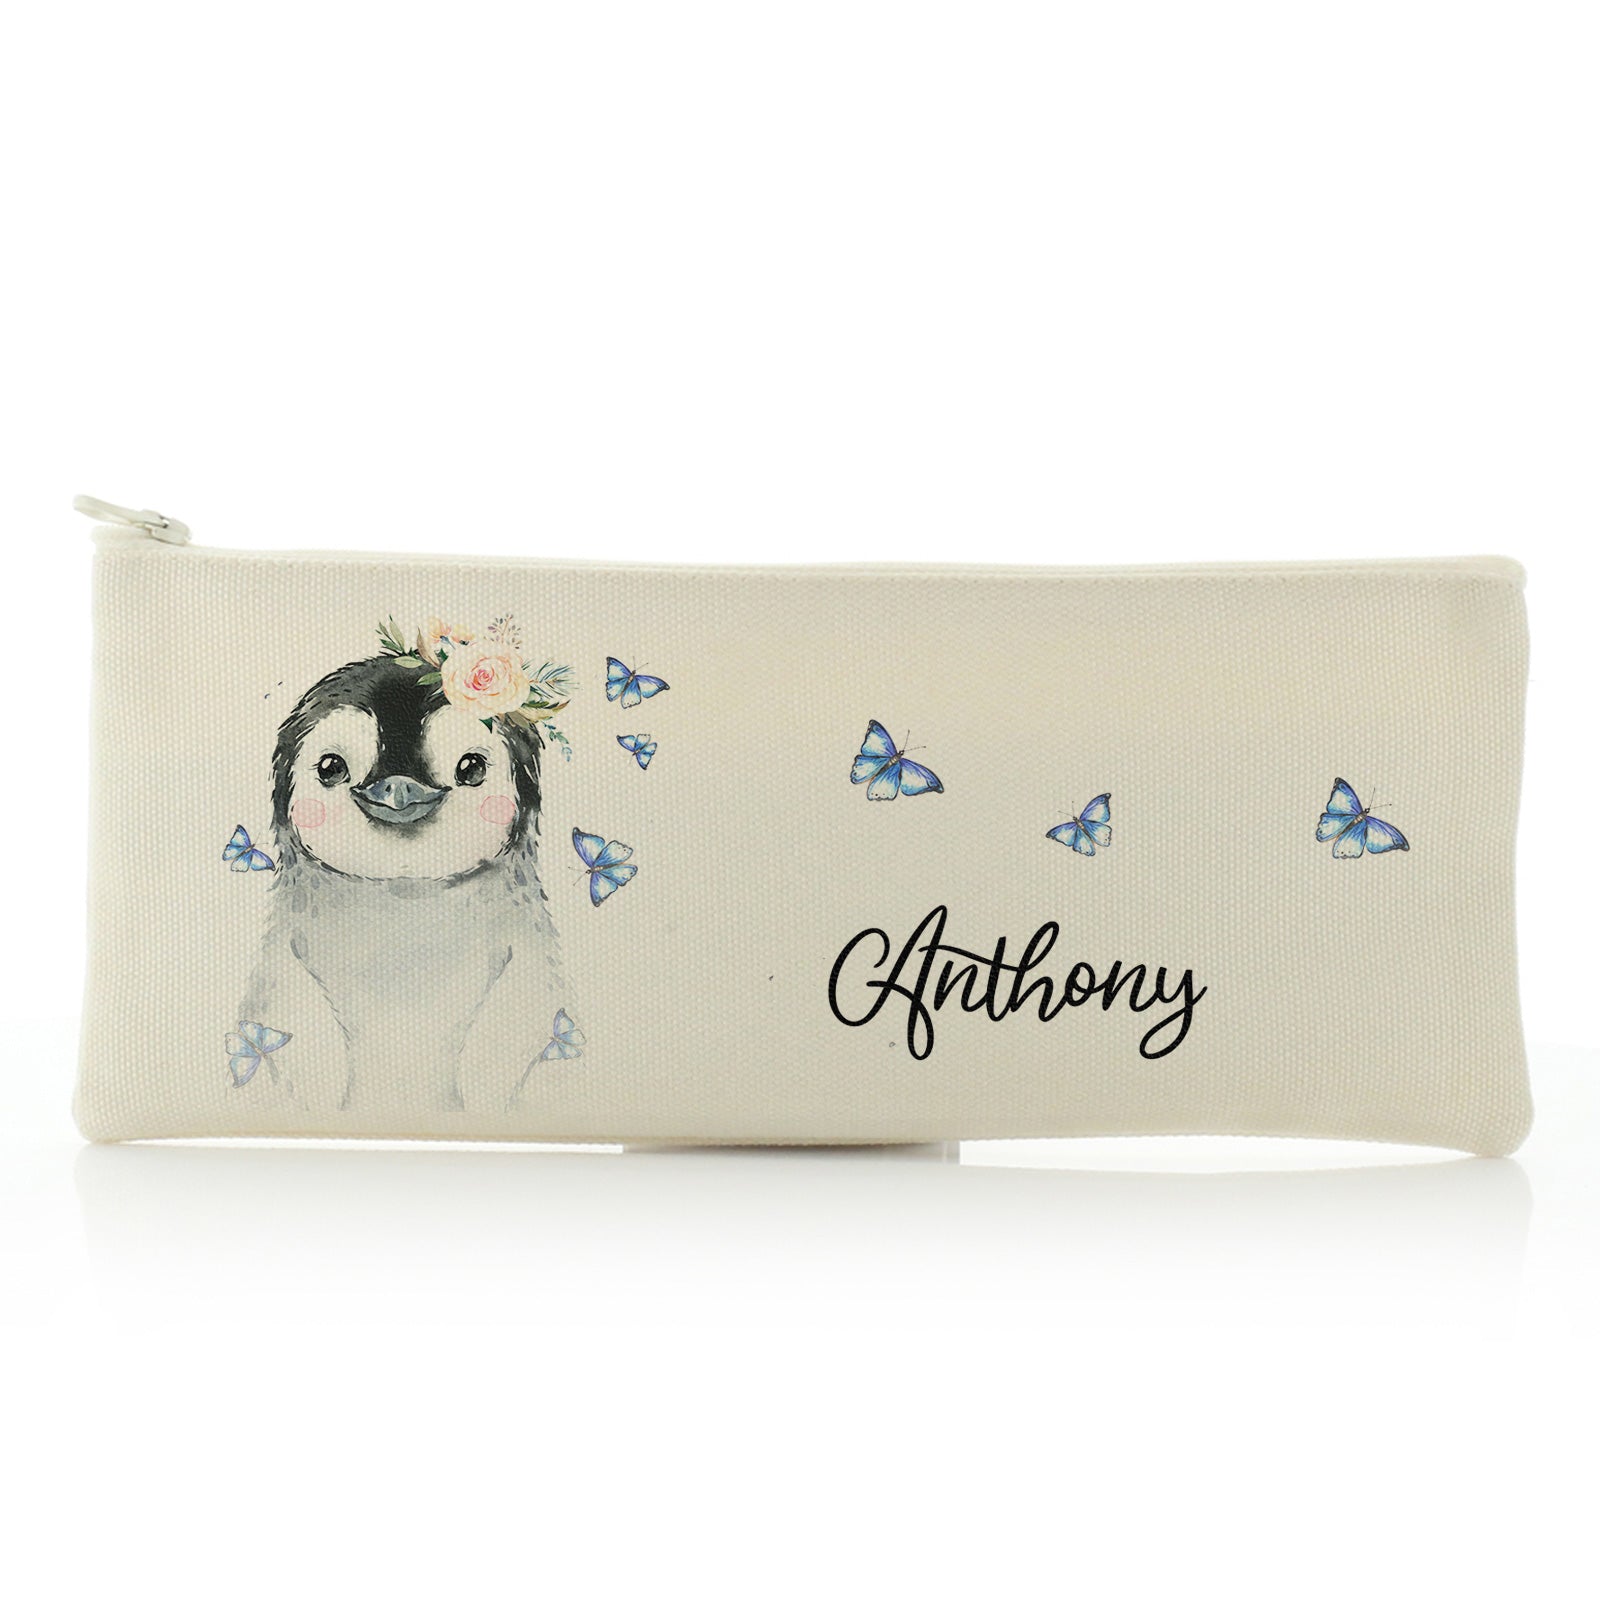 Personalised Canvas Zip Bag with Grey Penguin Blue Butterflies and Cute Text